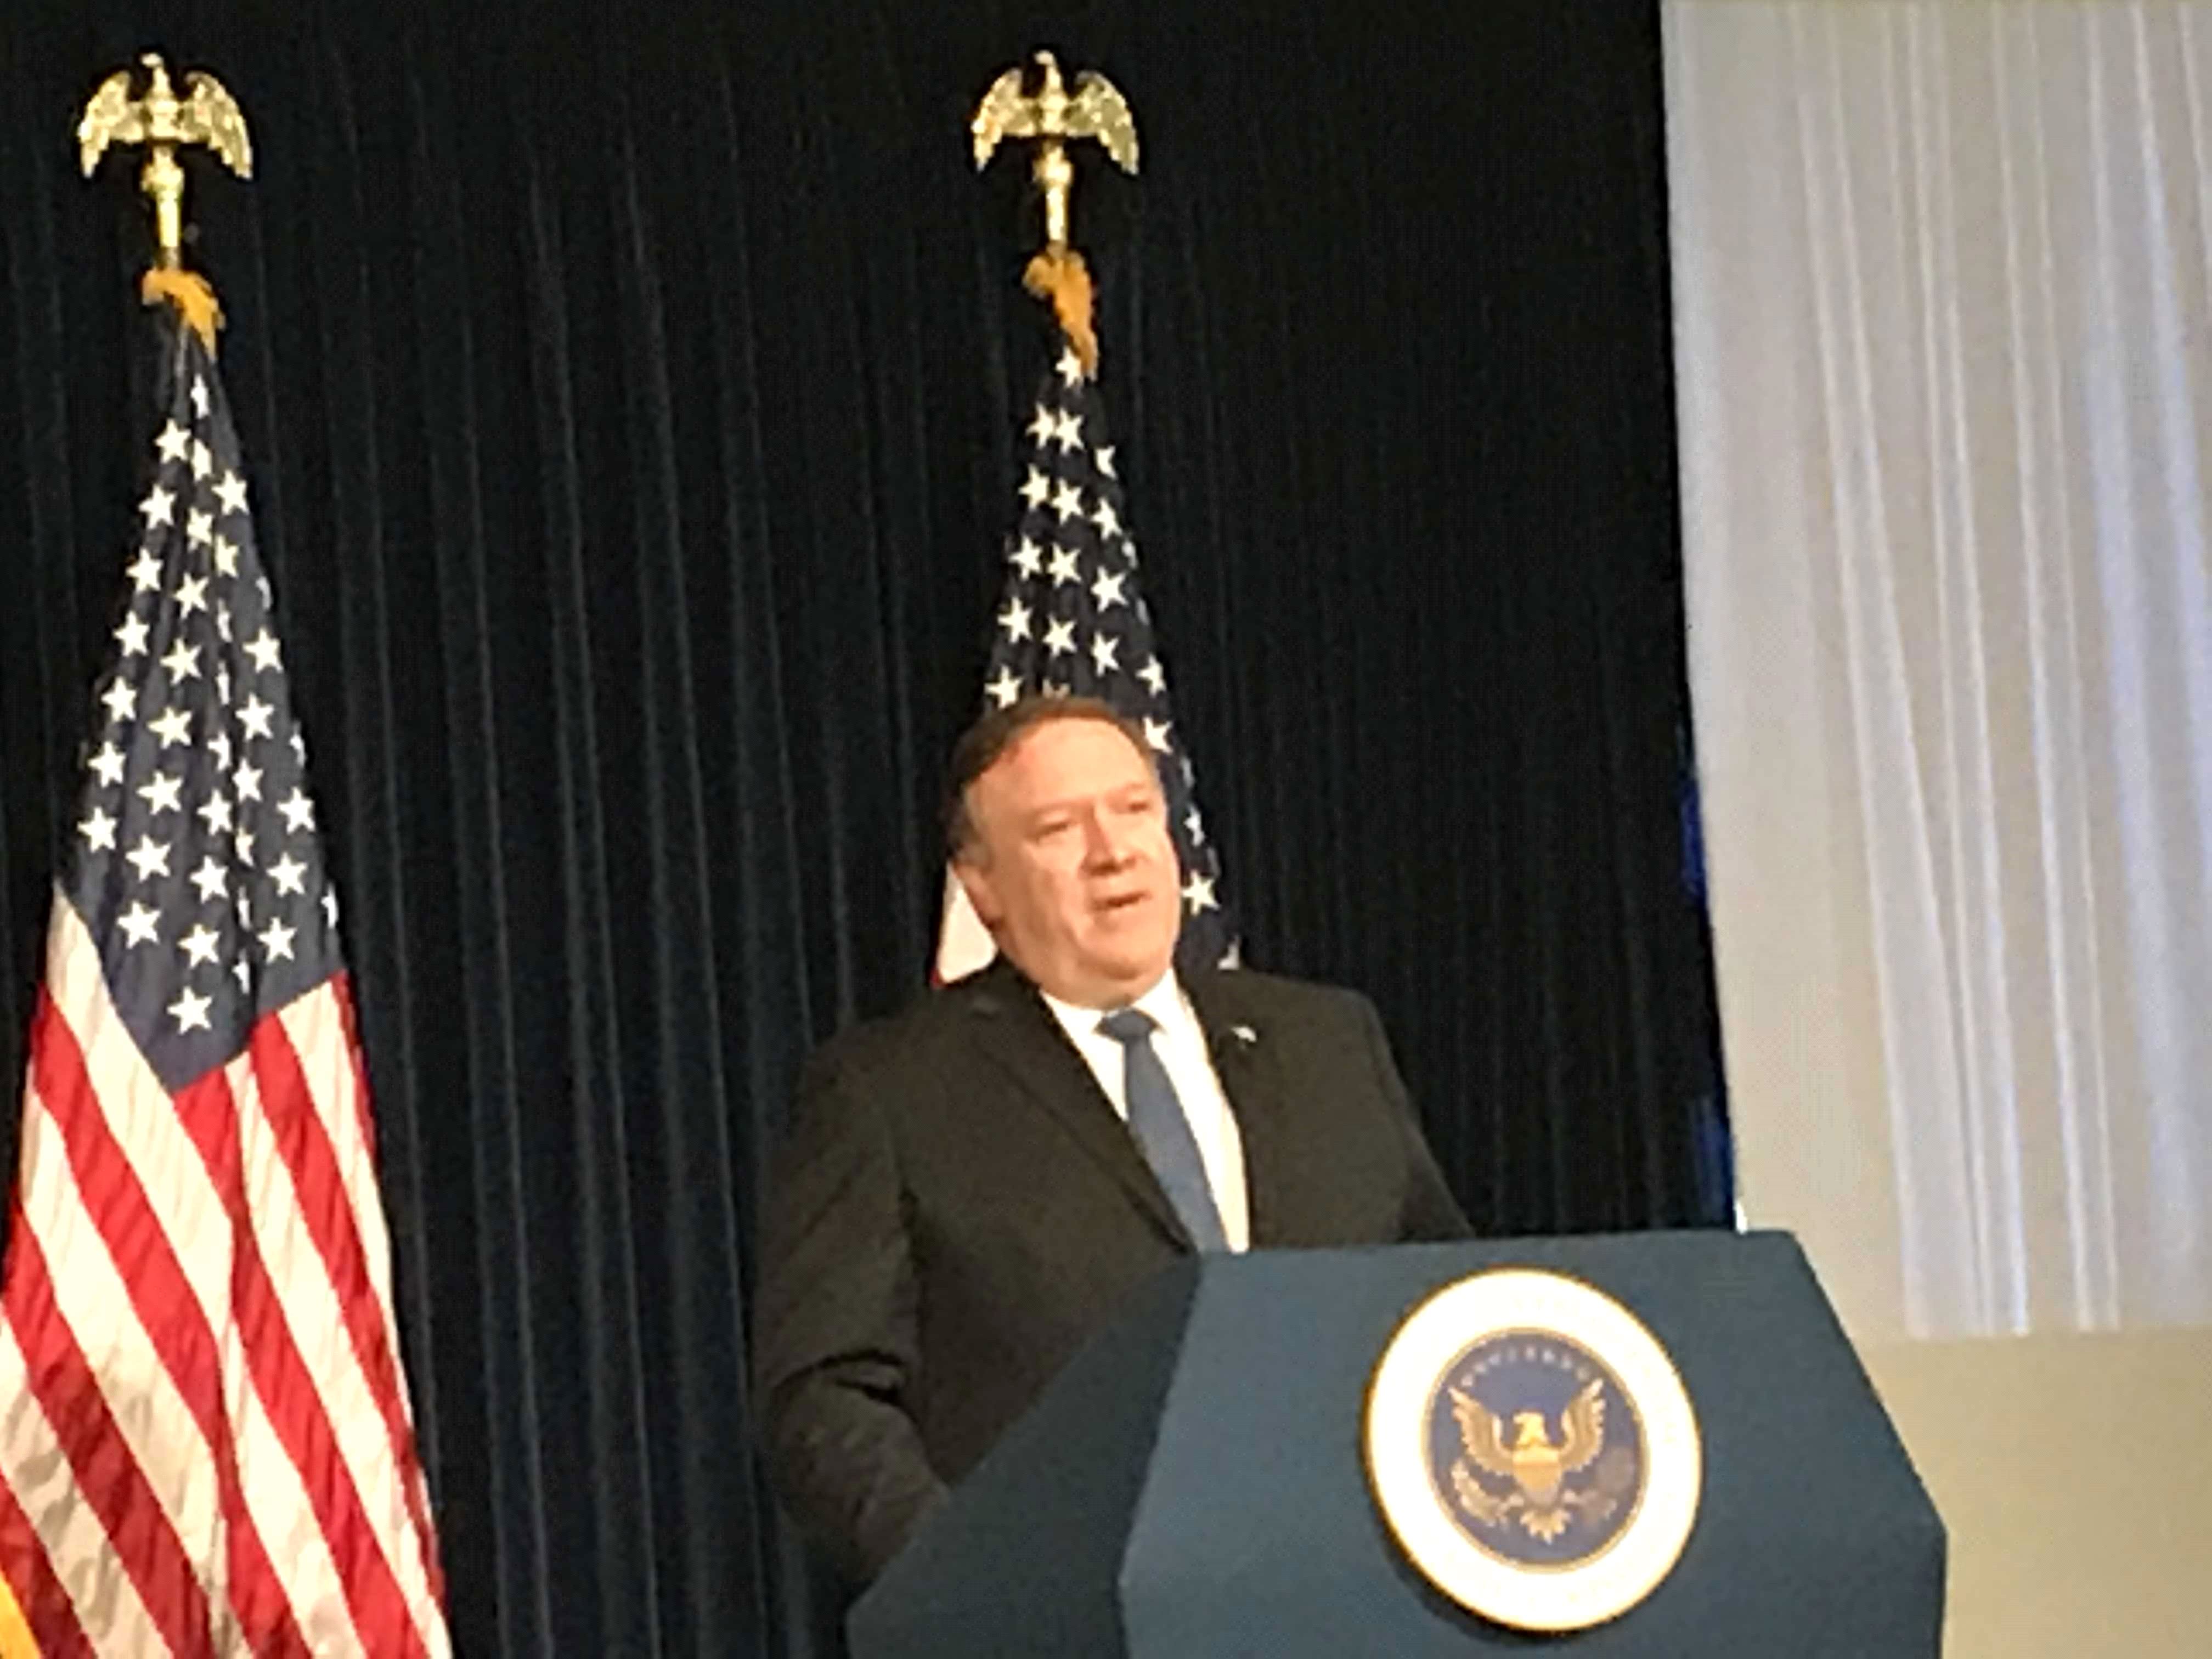 On Stage-Secretary Mike Pompeo (Photo credit Nurit Greenger)